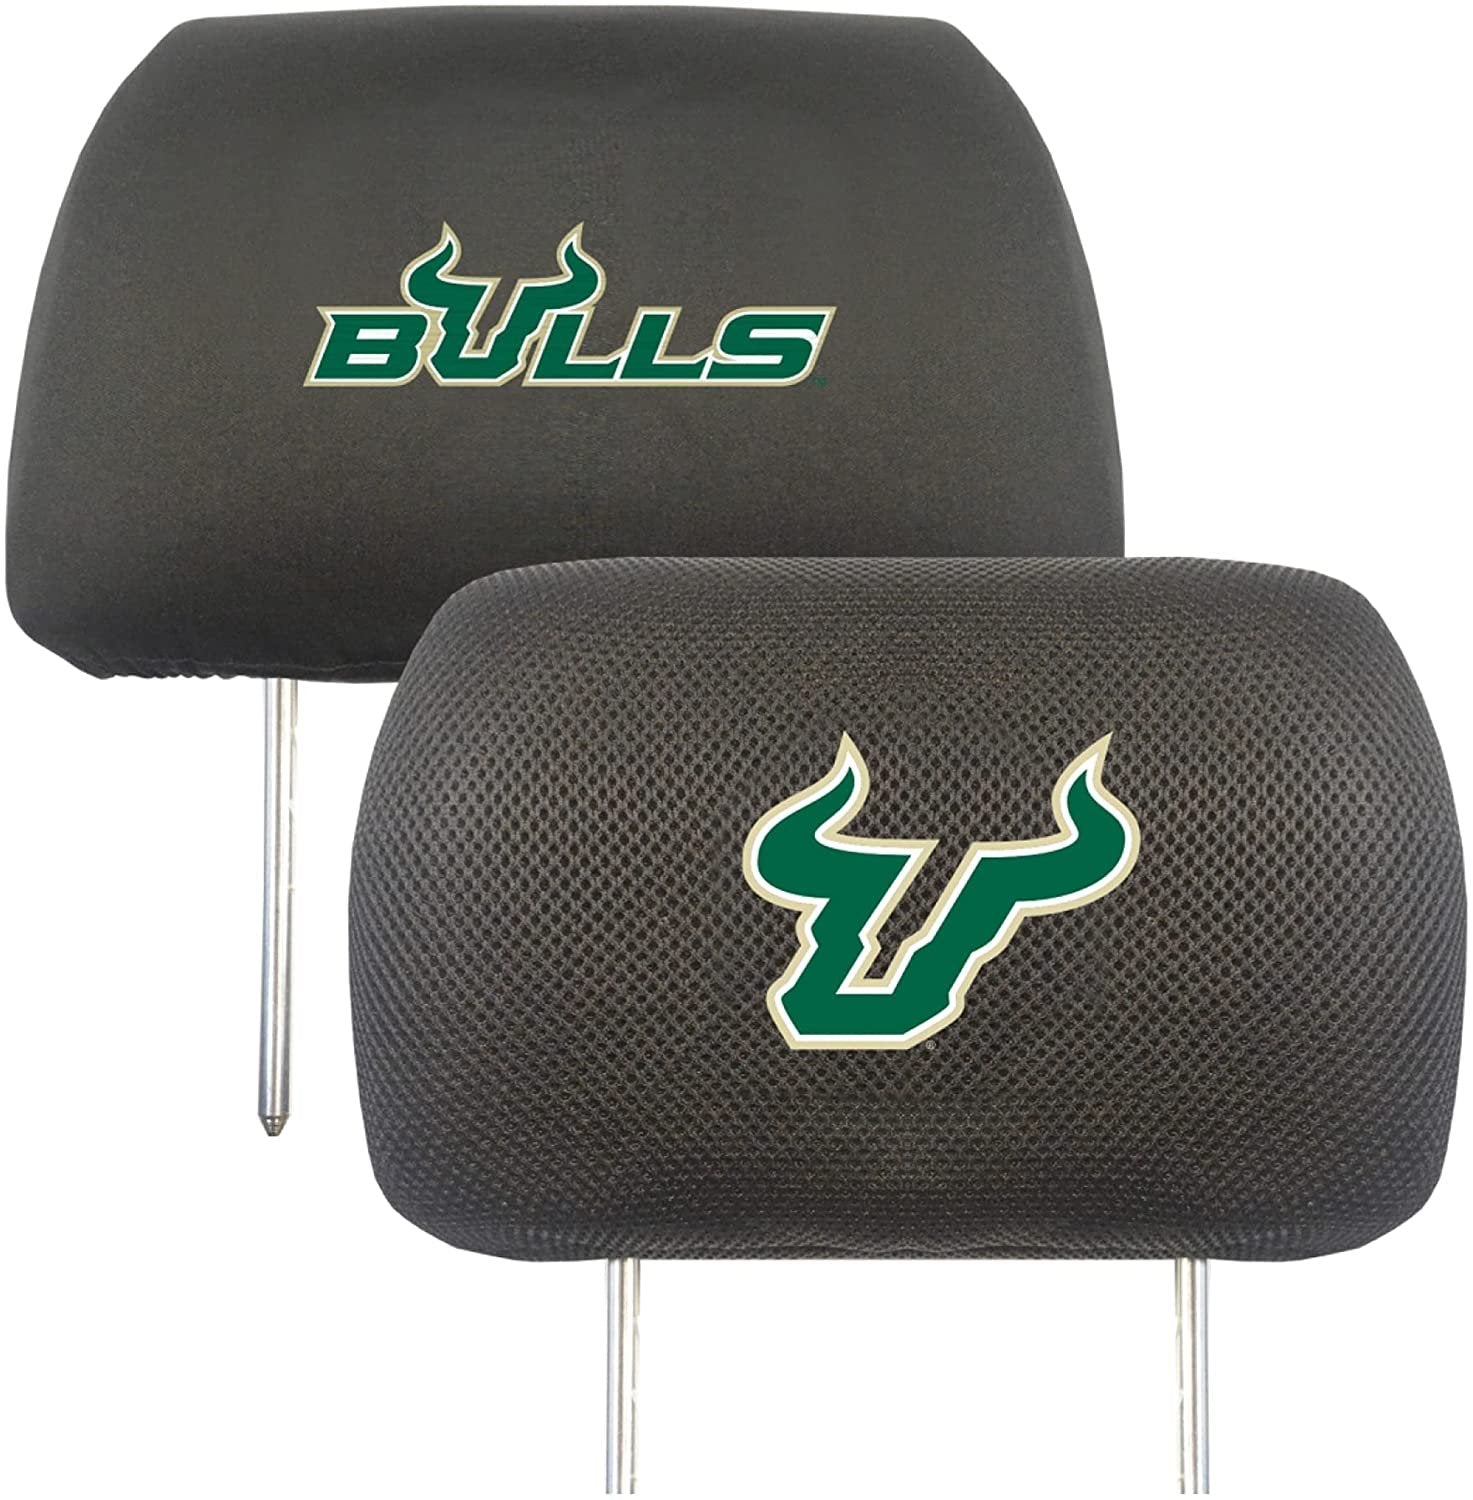 University of South Florida Bulls USF Pair of Premium Auto Head Rest Covers, Embroidered, Black Elastic, 14x10 Inch